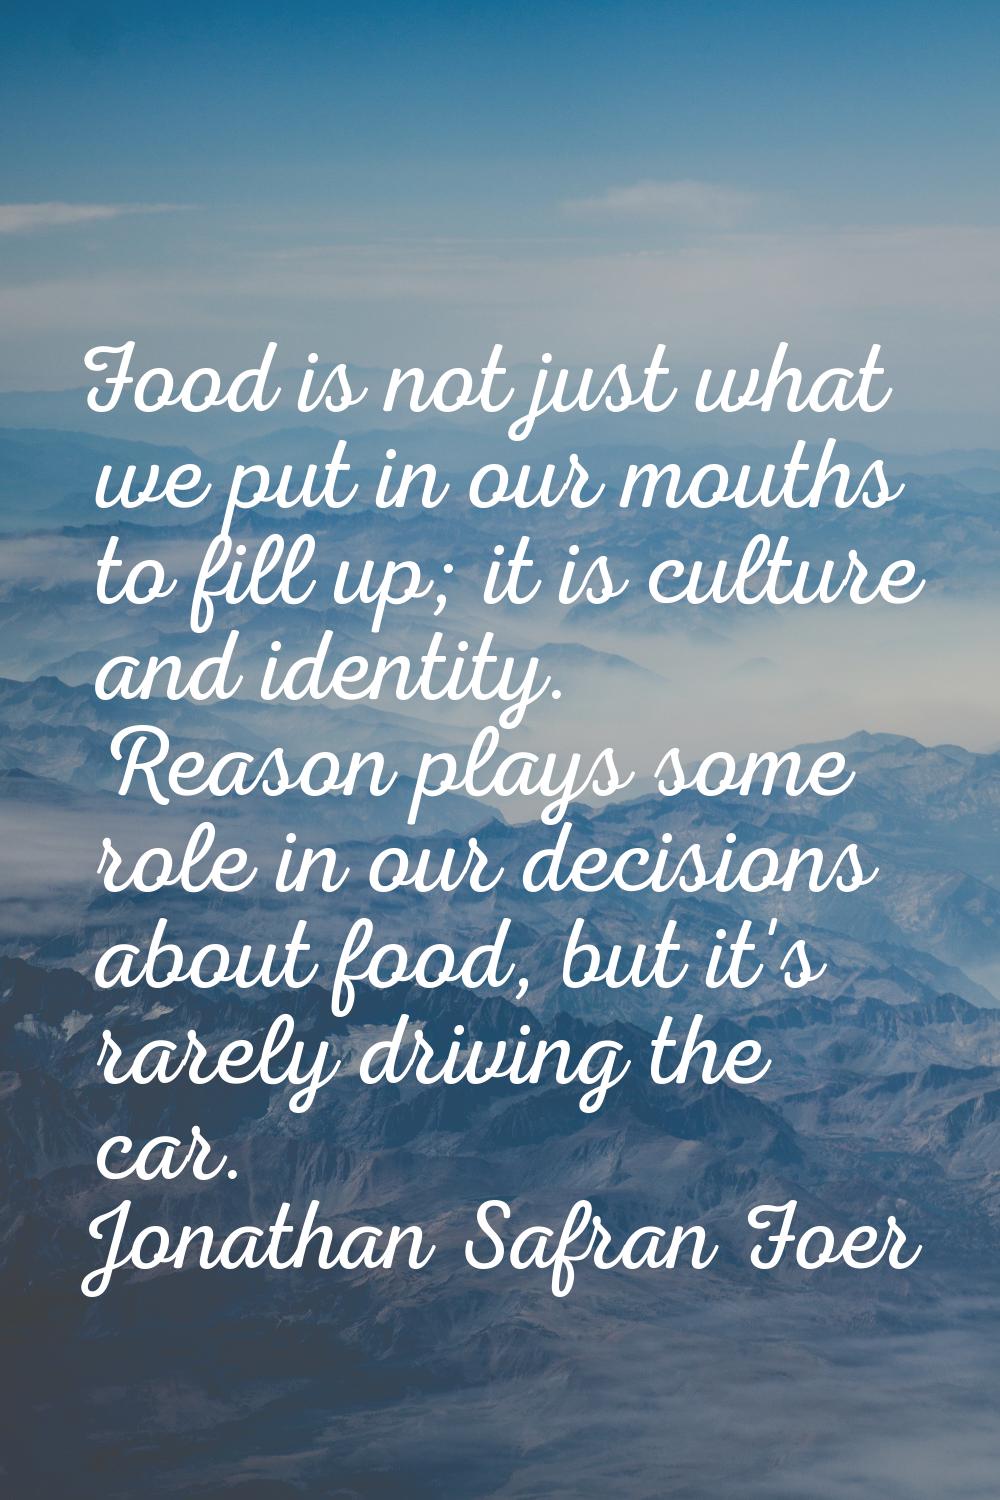 Food is not just what we put in our mouths to fill up; it is culture and identity. Reason plays som